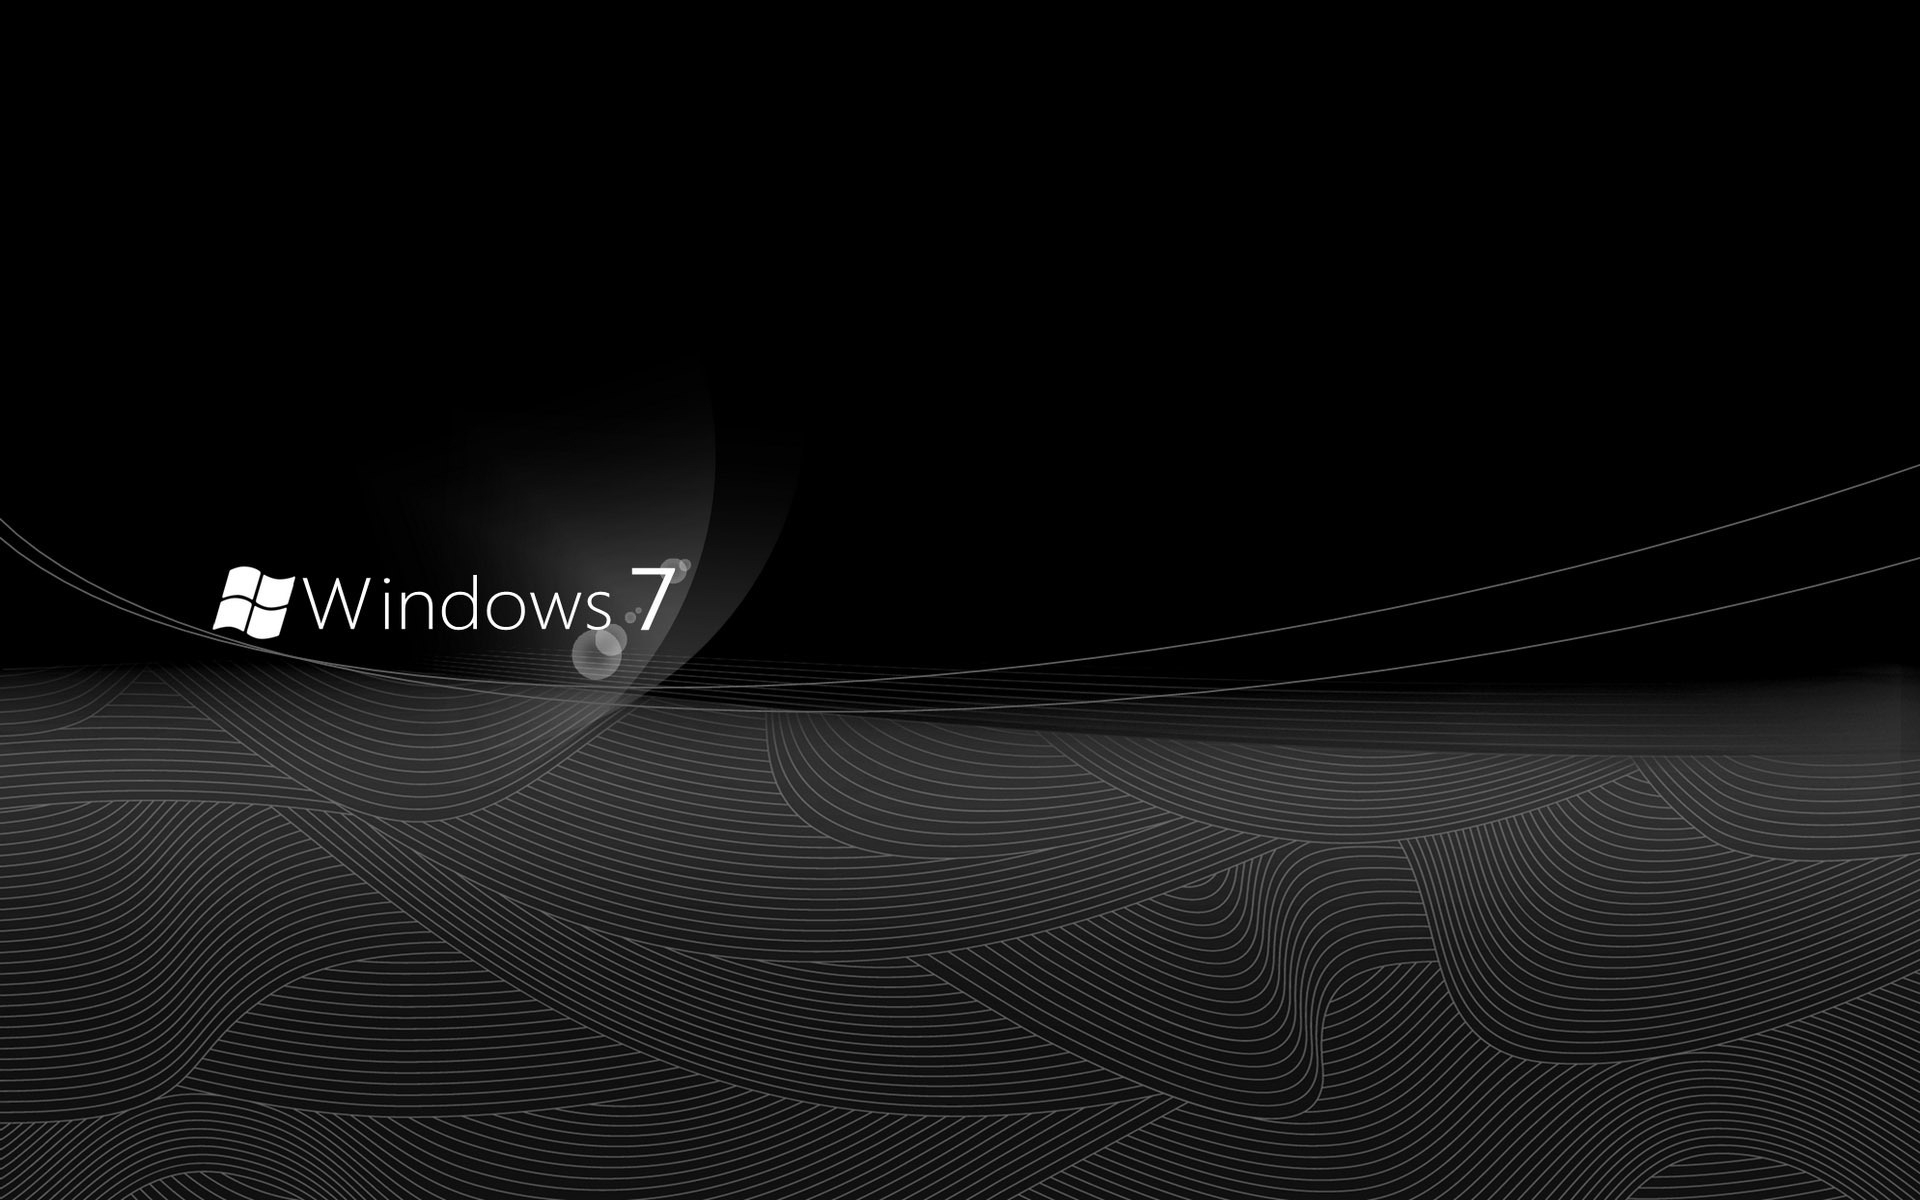 10 Top Windows 7 Black Wallpaper FULL HD 1080p For PC Background 2020